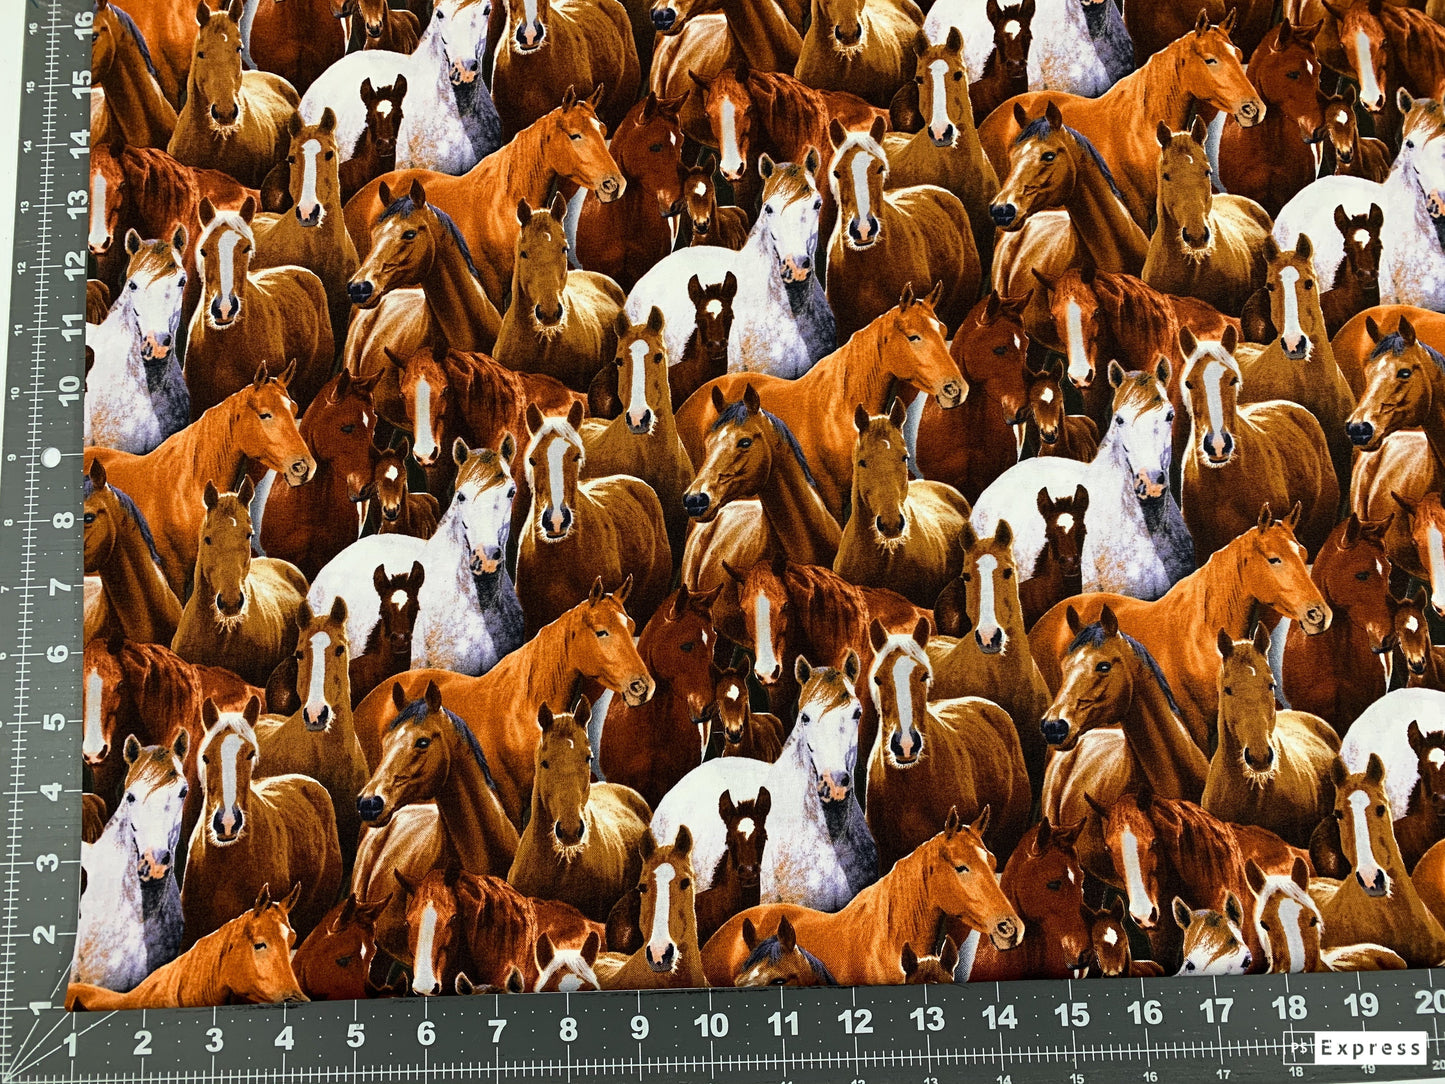 Beautiful Horses fabric  great for a horse quilt